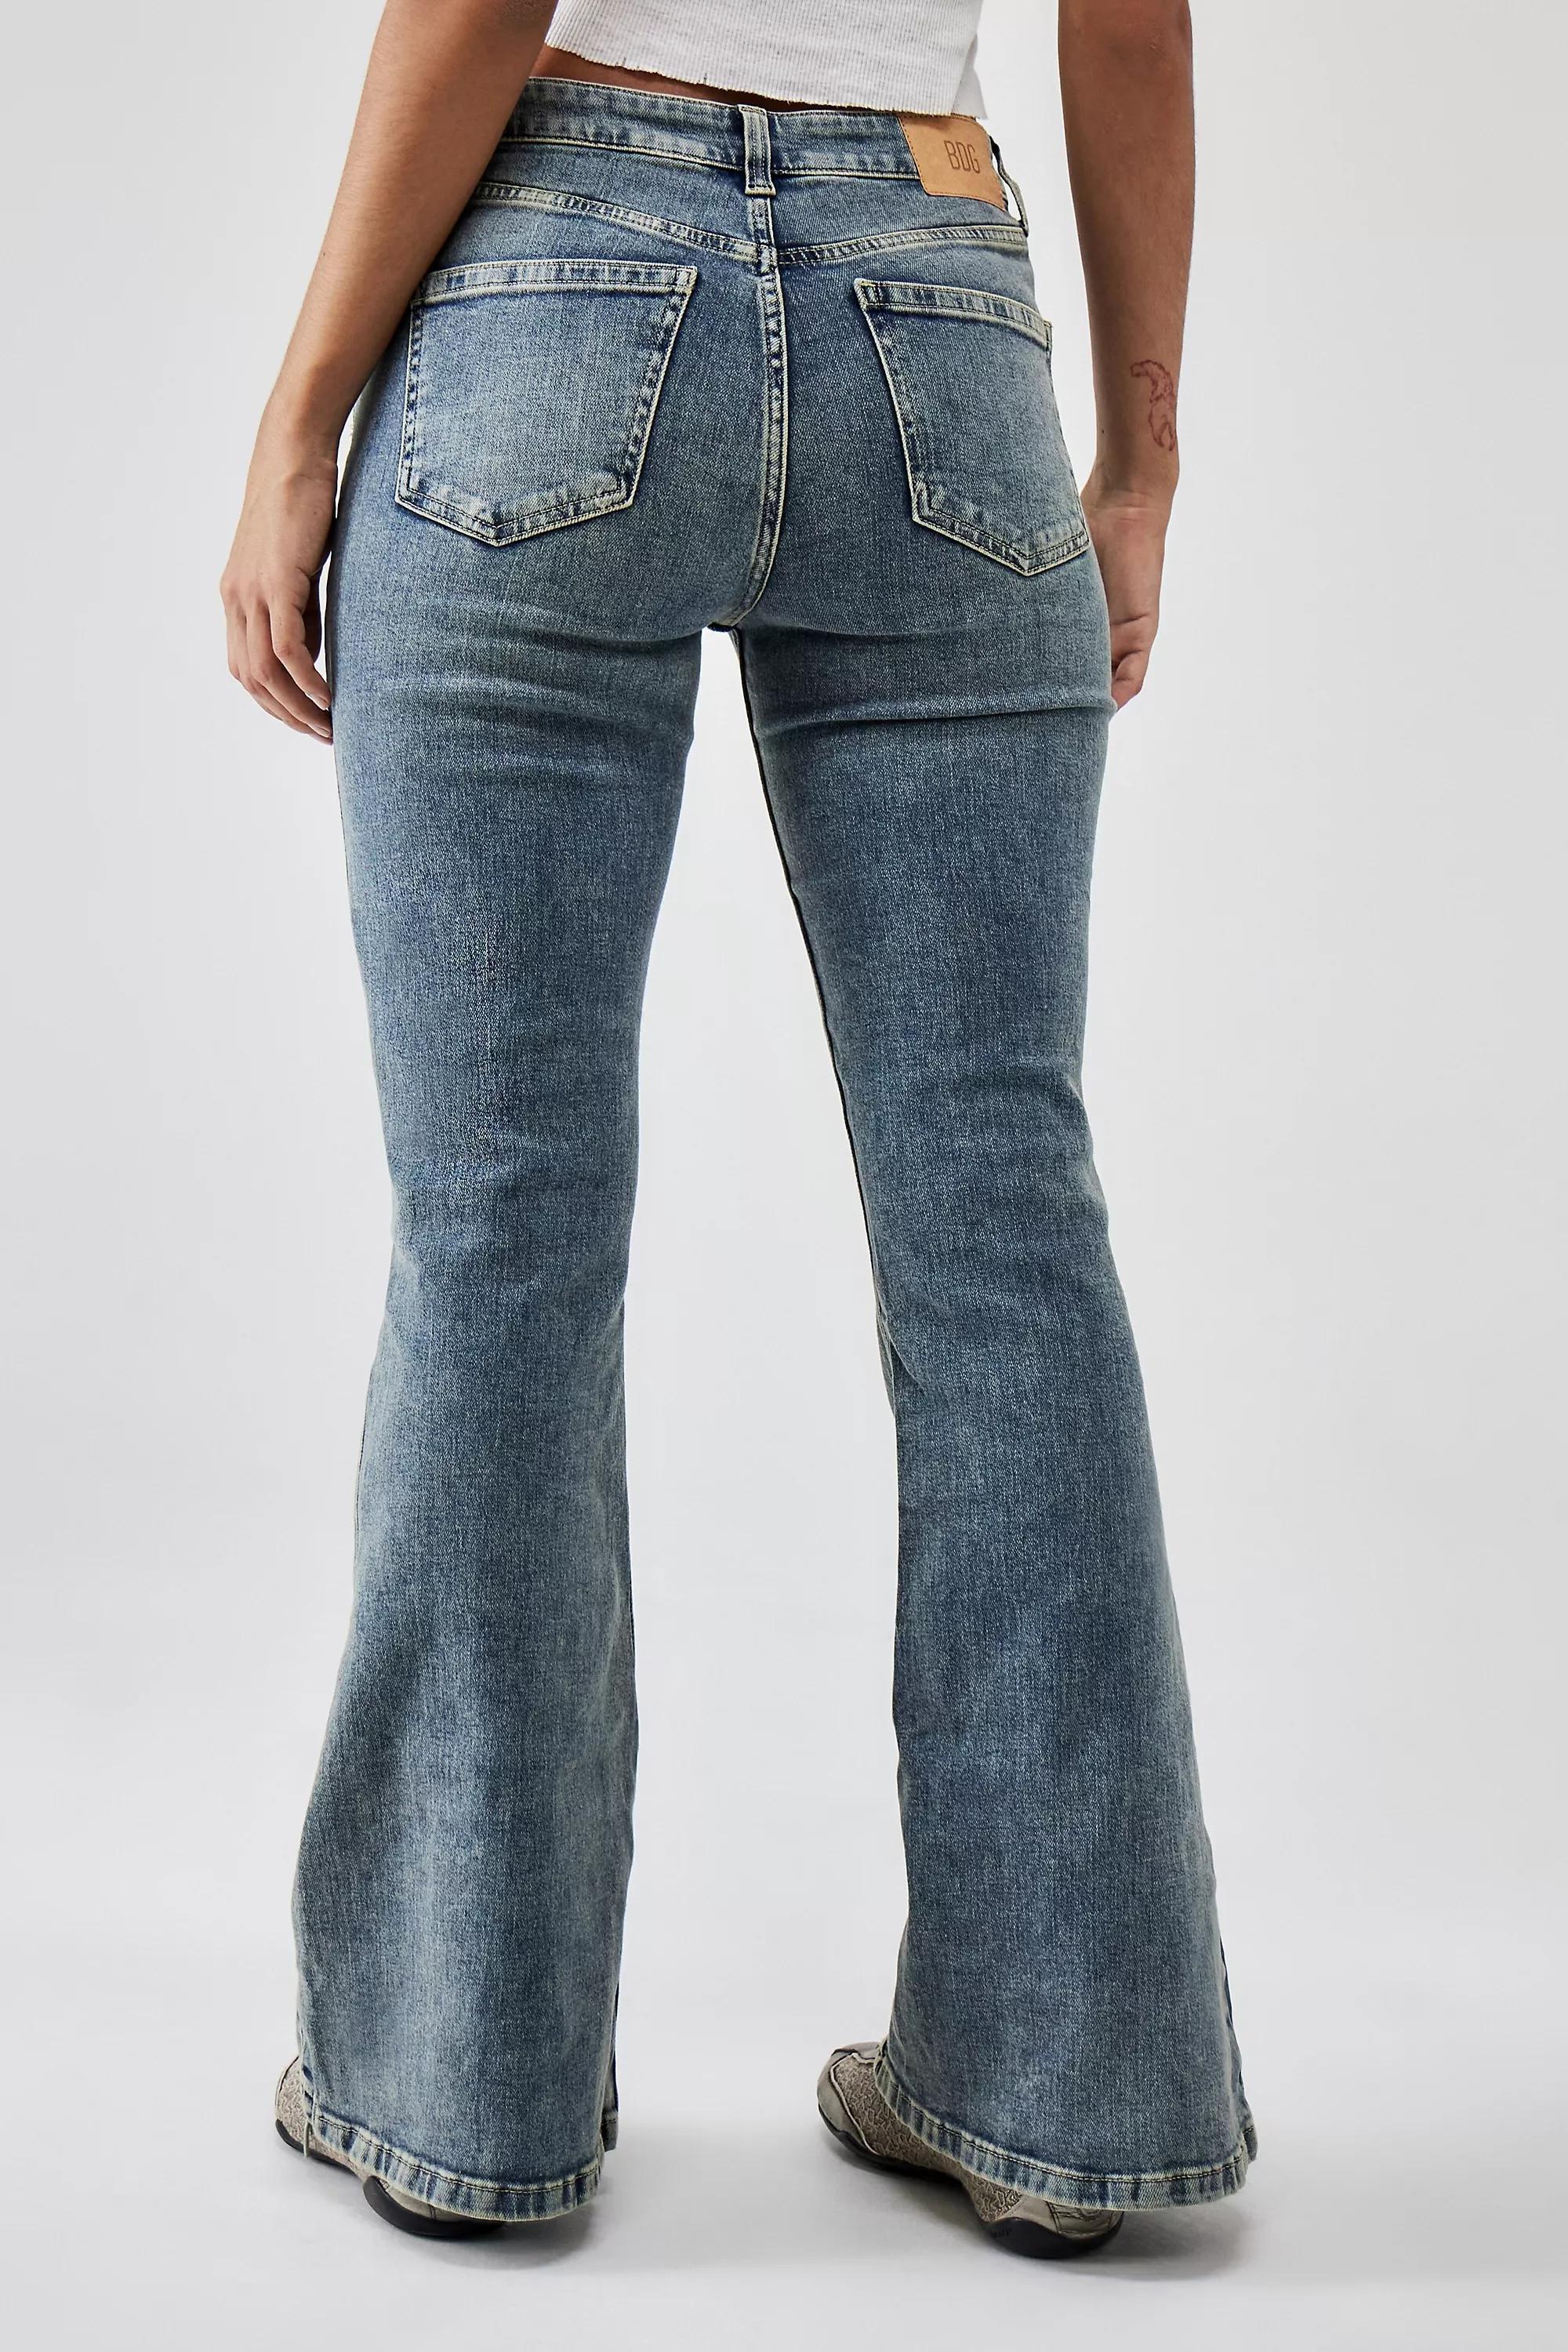 Urban Outfitters - Blue Light Bdg Distressed Flare Cowb